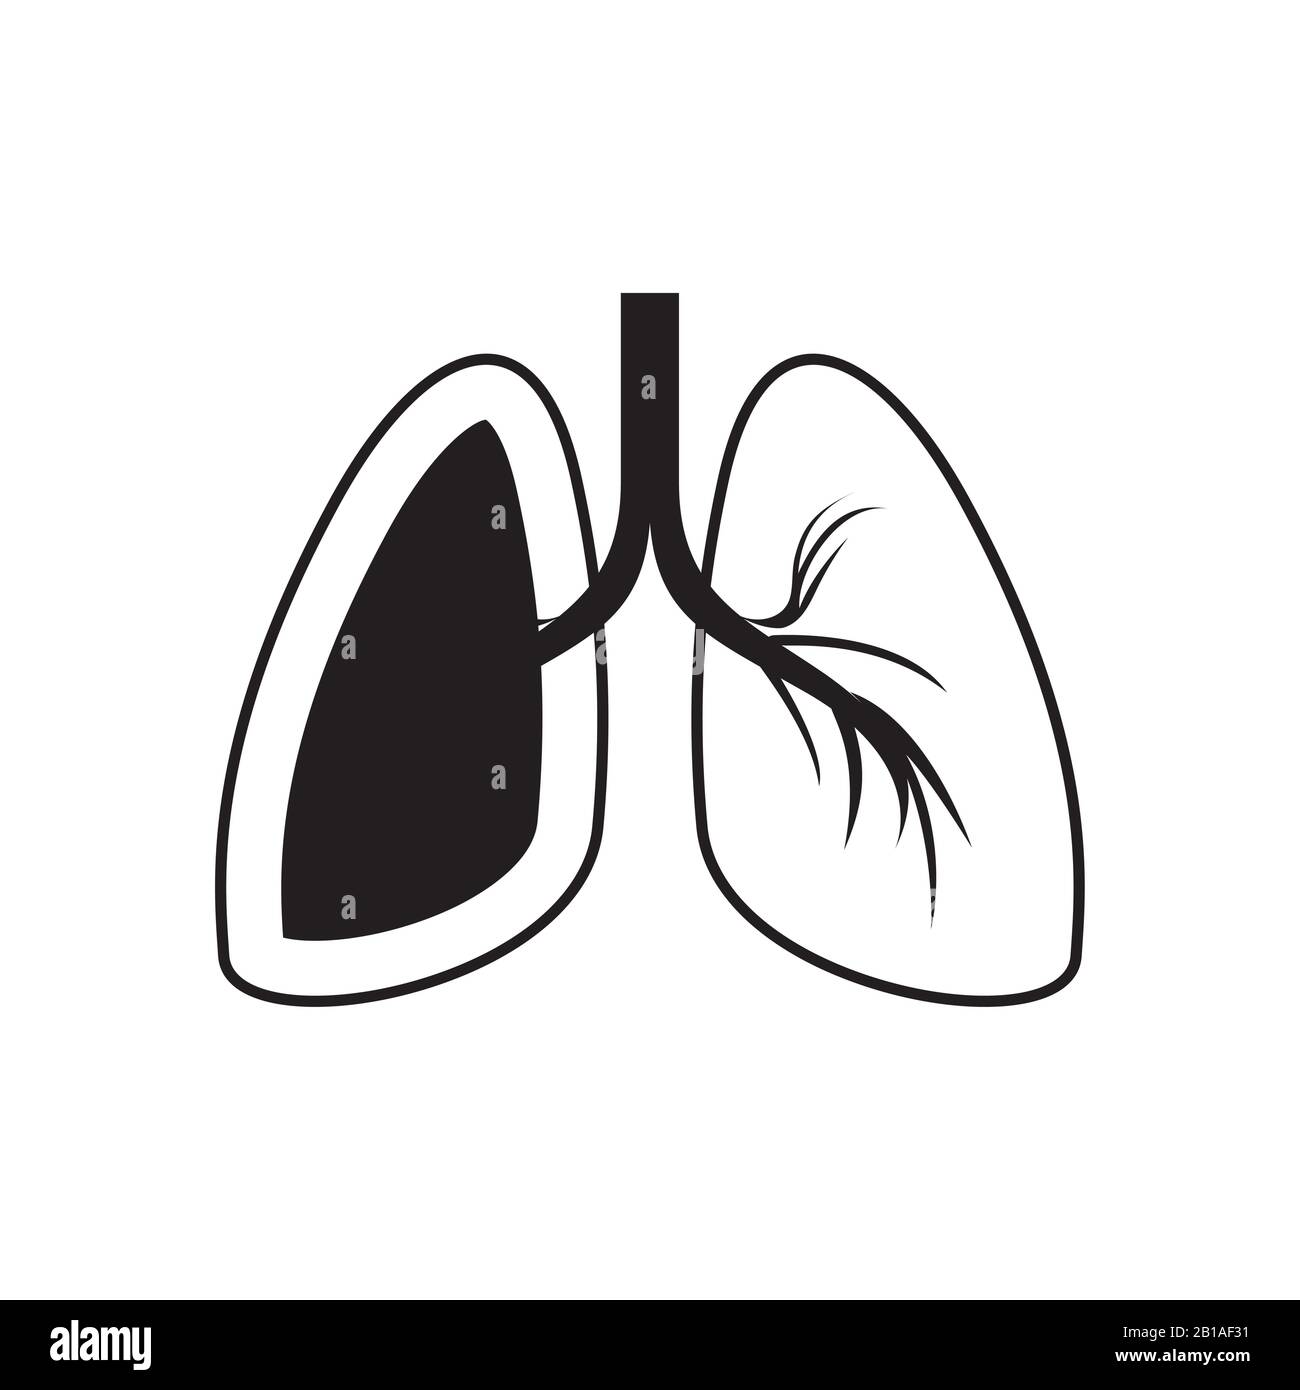 Isolated lungs icon vector design Stock Vector